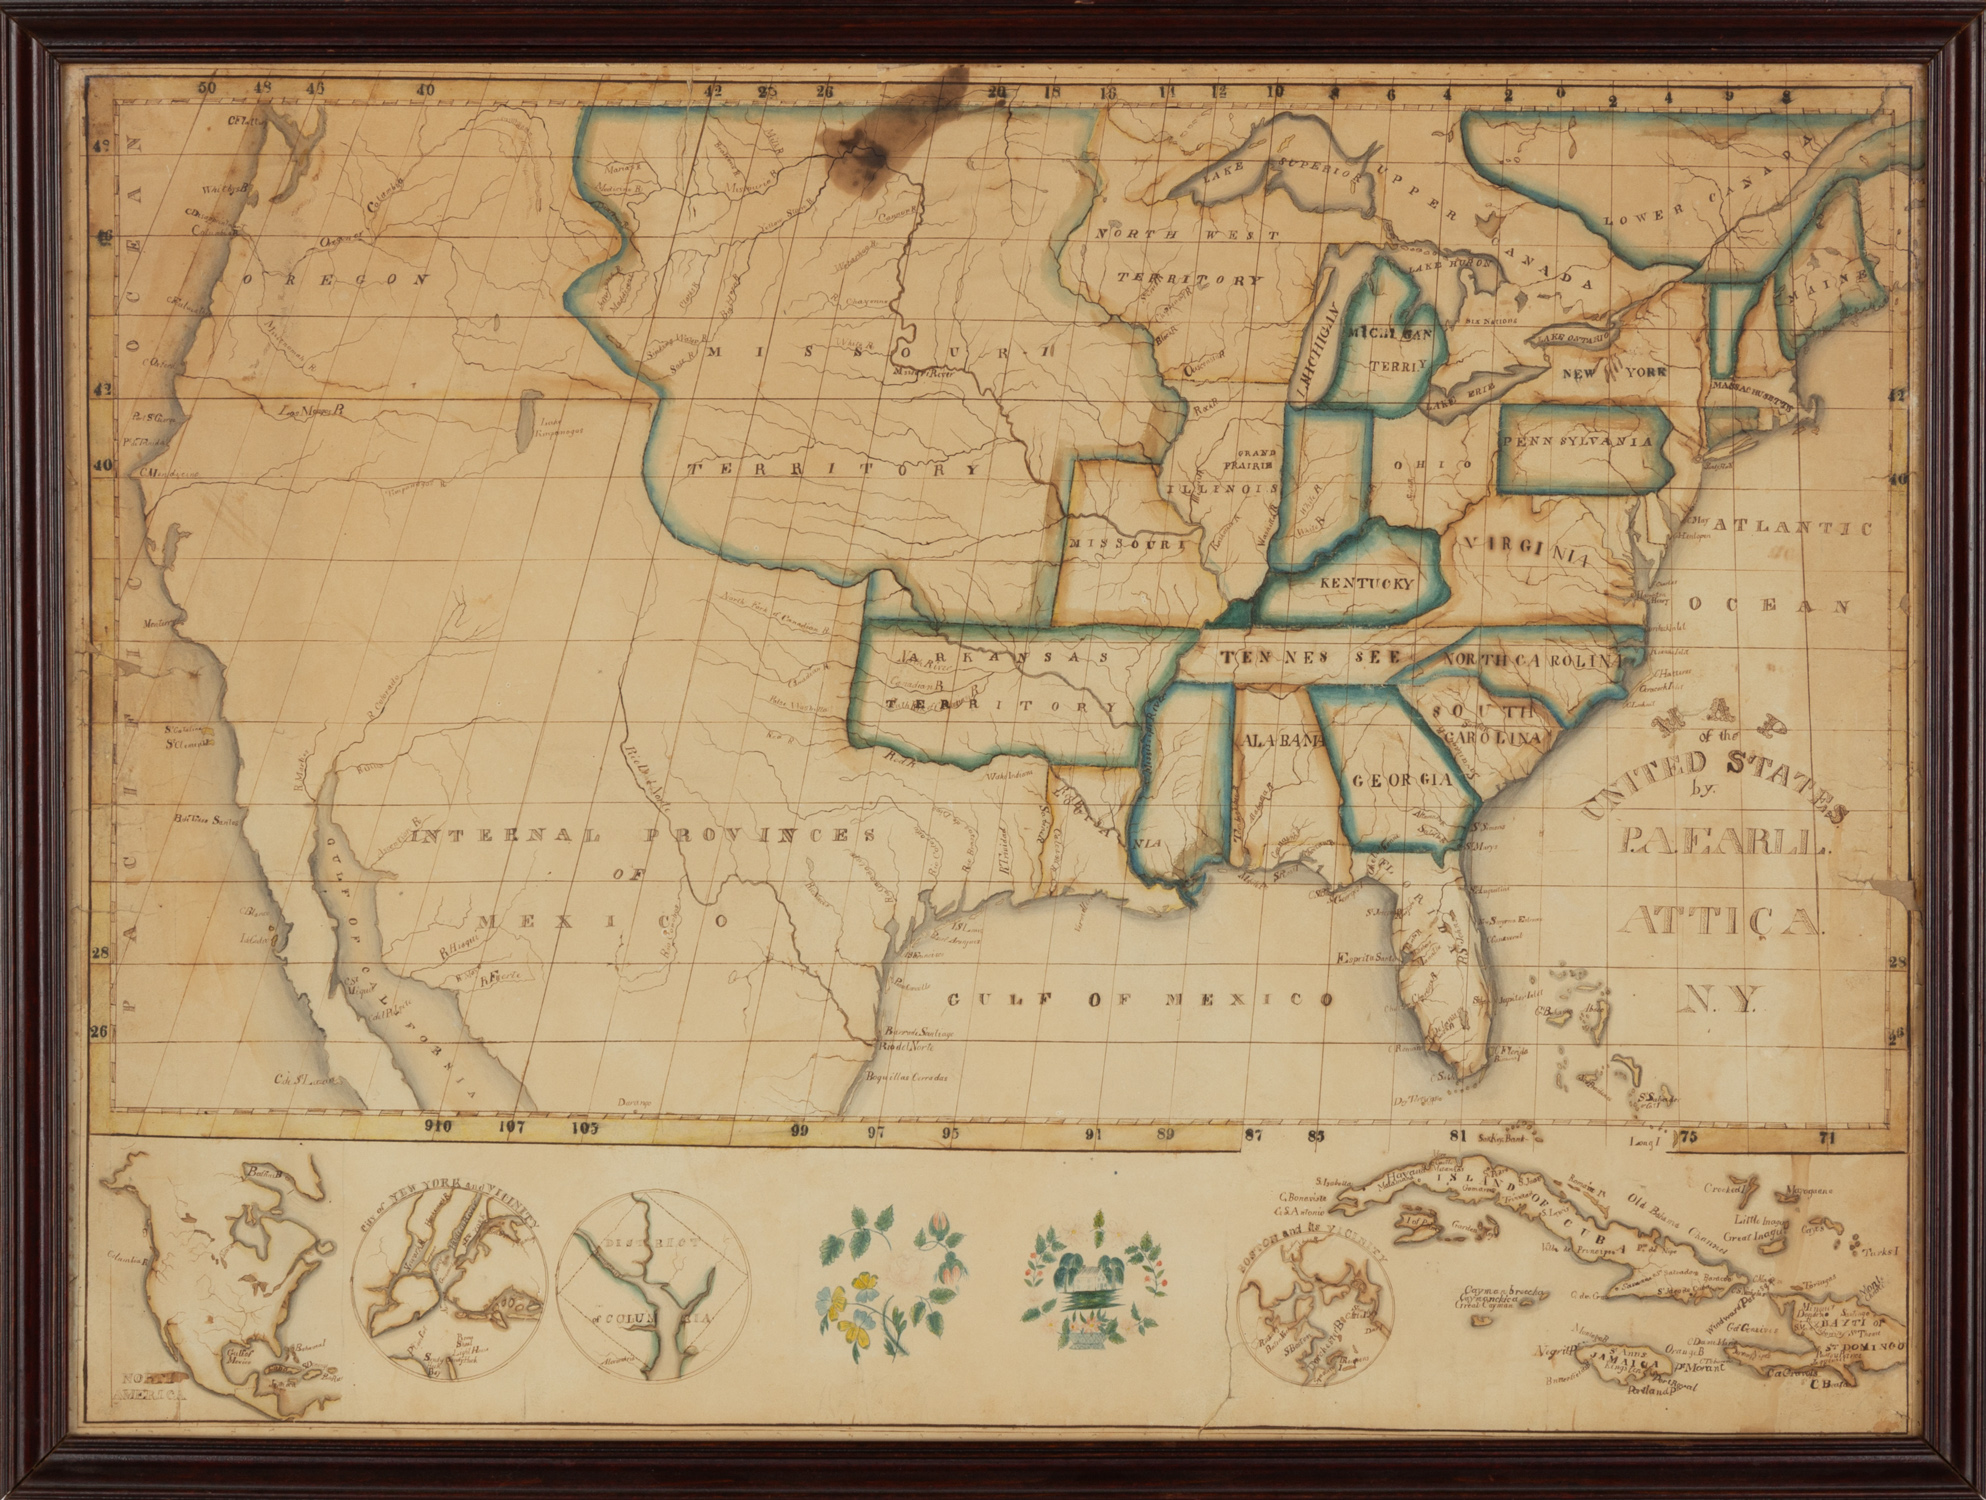 MAP OF UNITED STATES BY P. A. EARLL,